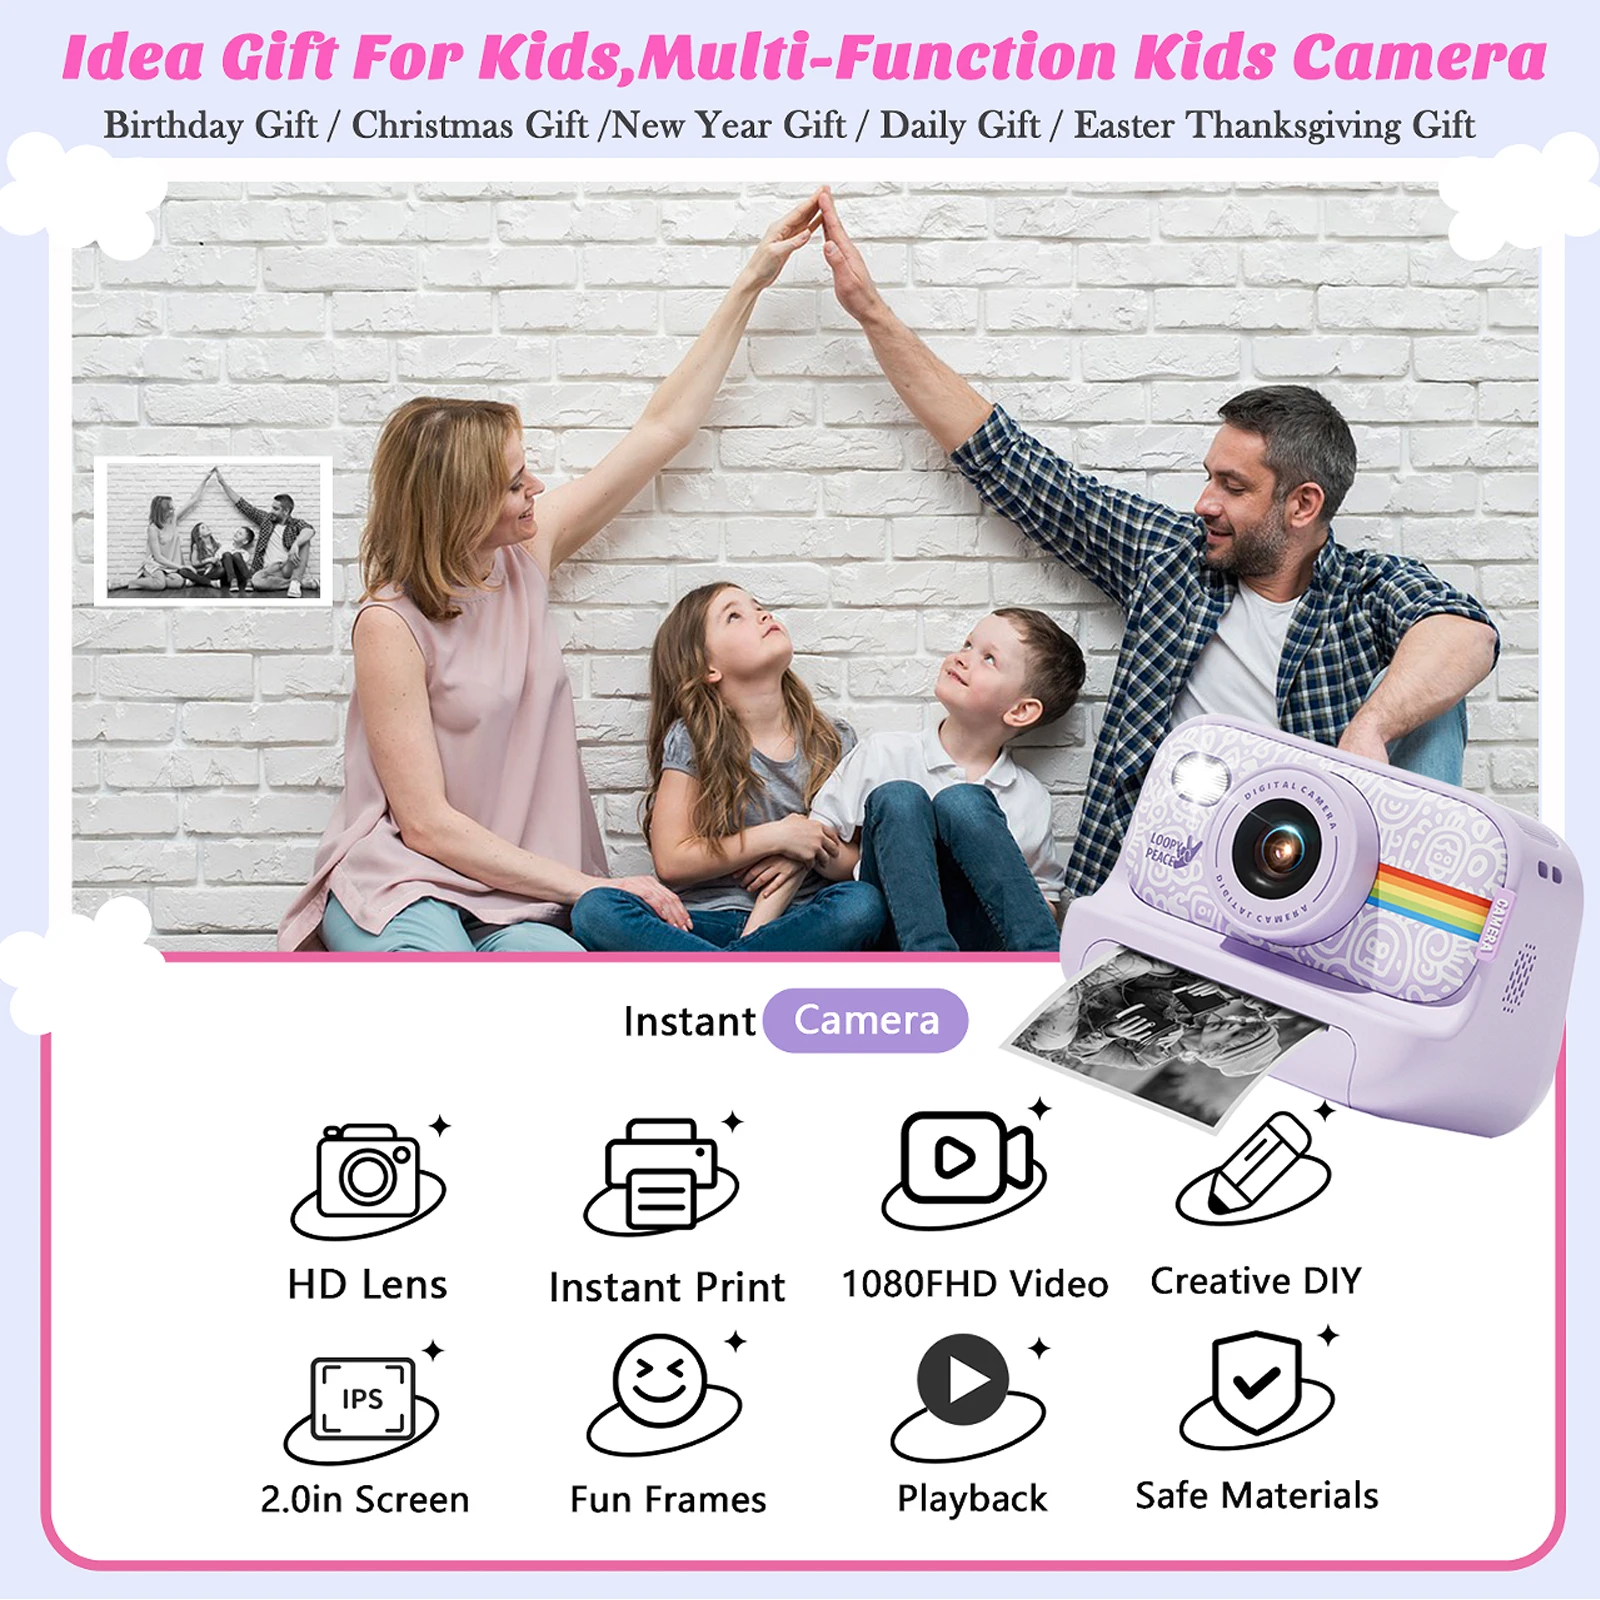 Instant Print Camera for Kids,2.0 Inch Screen Kids Instant Cameras, Christmas Birthday Gifts for Girls Age 3-12,Toddler Toy